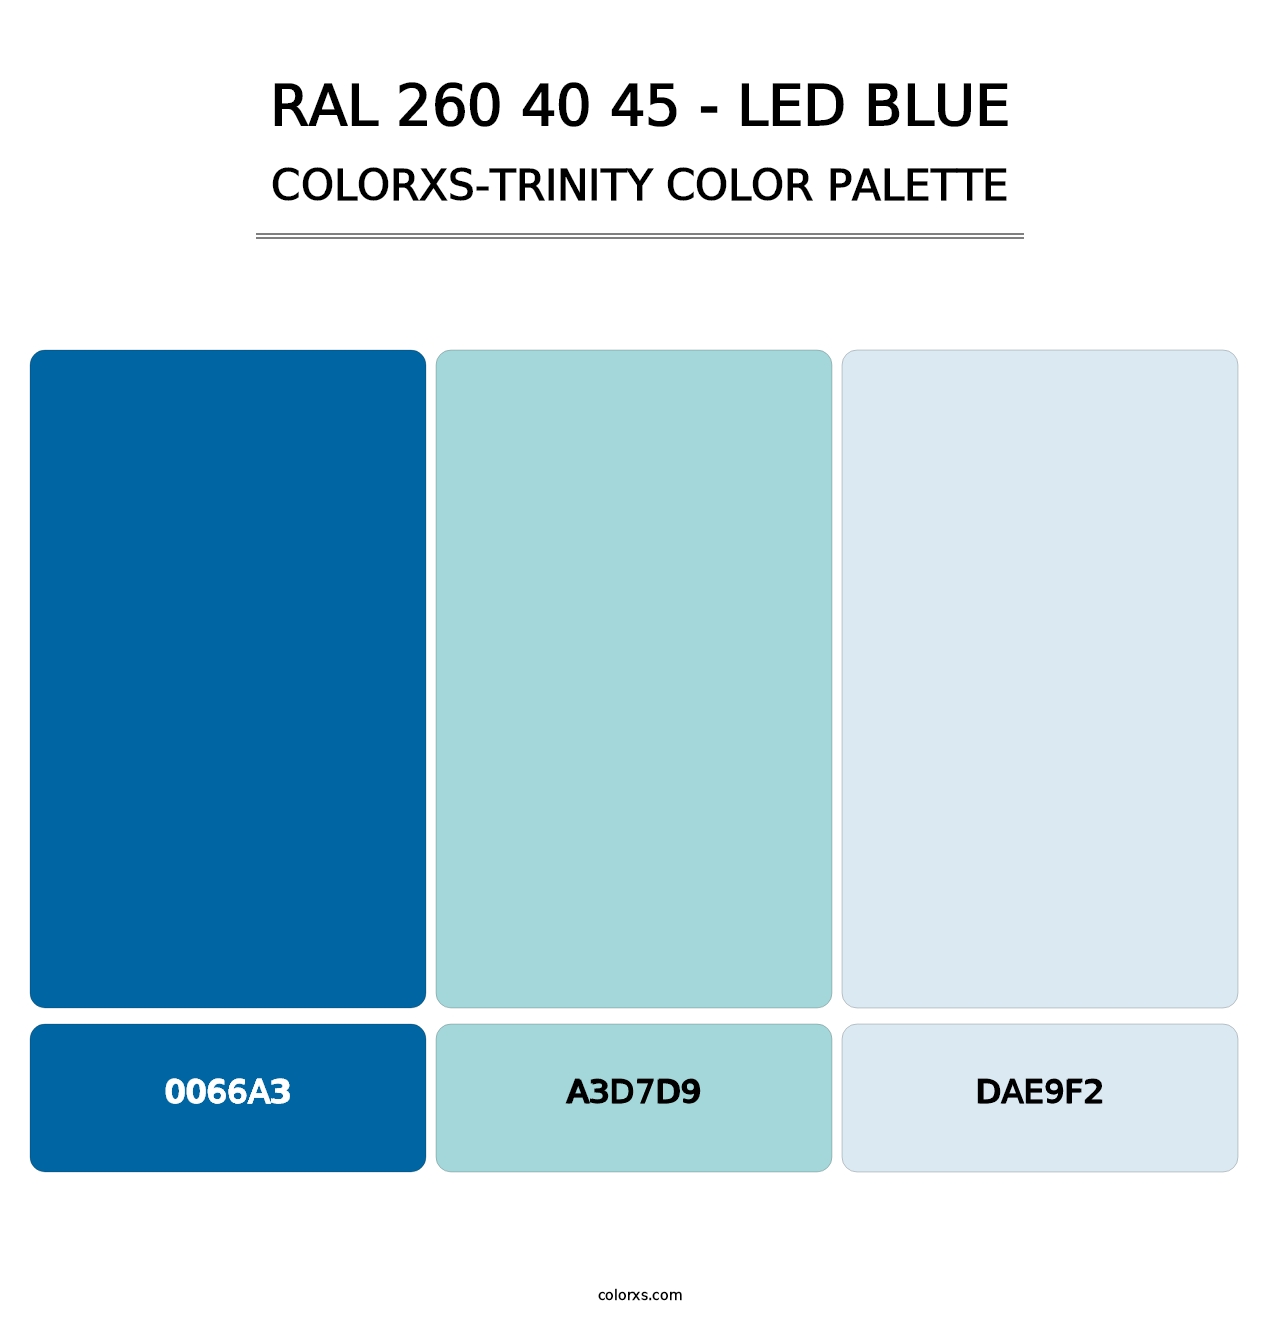 RAL 260 40 45 - LED Blue - Colorxs Trinity Palette